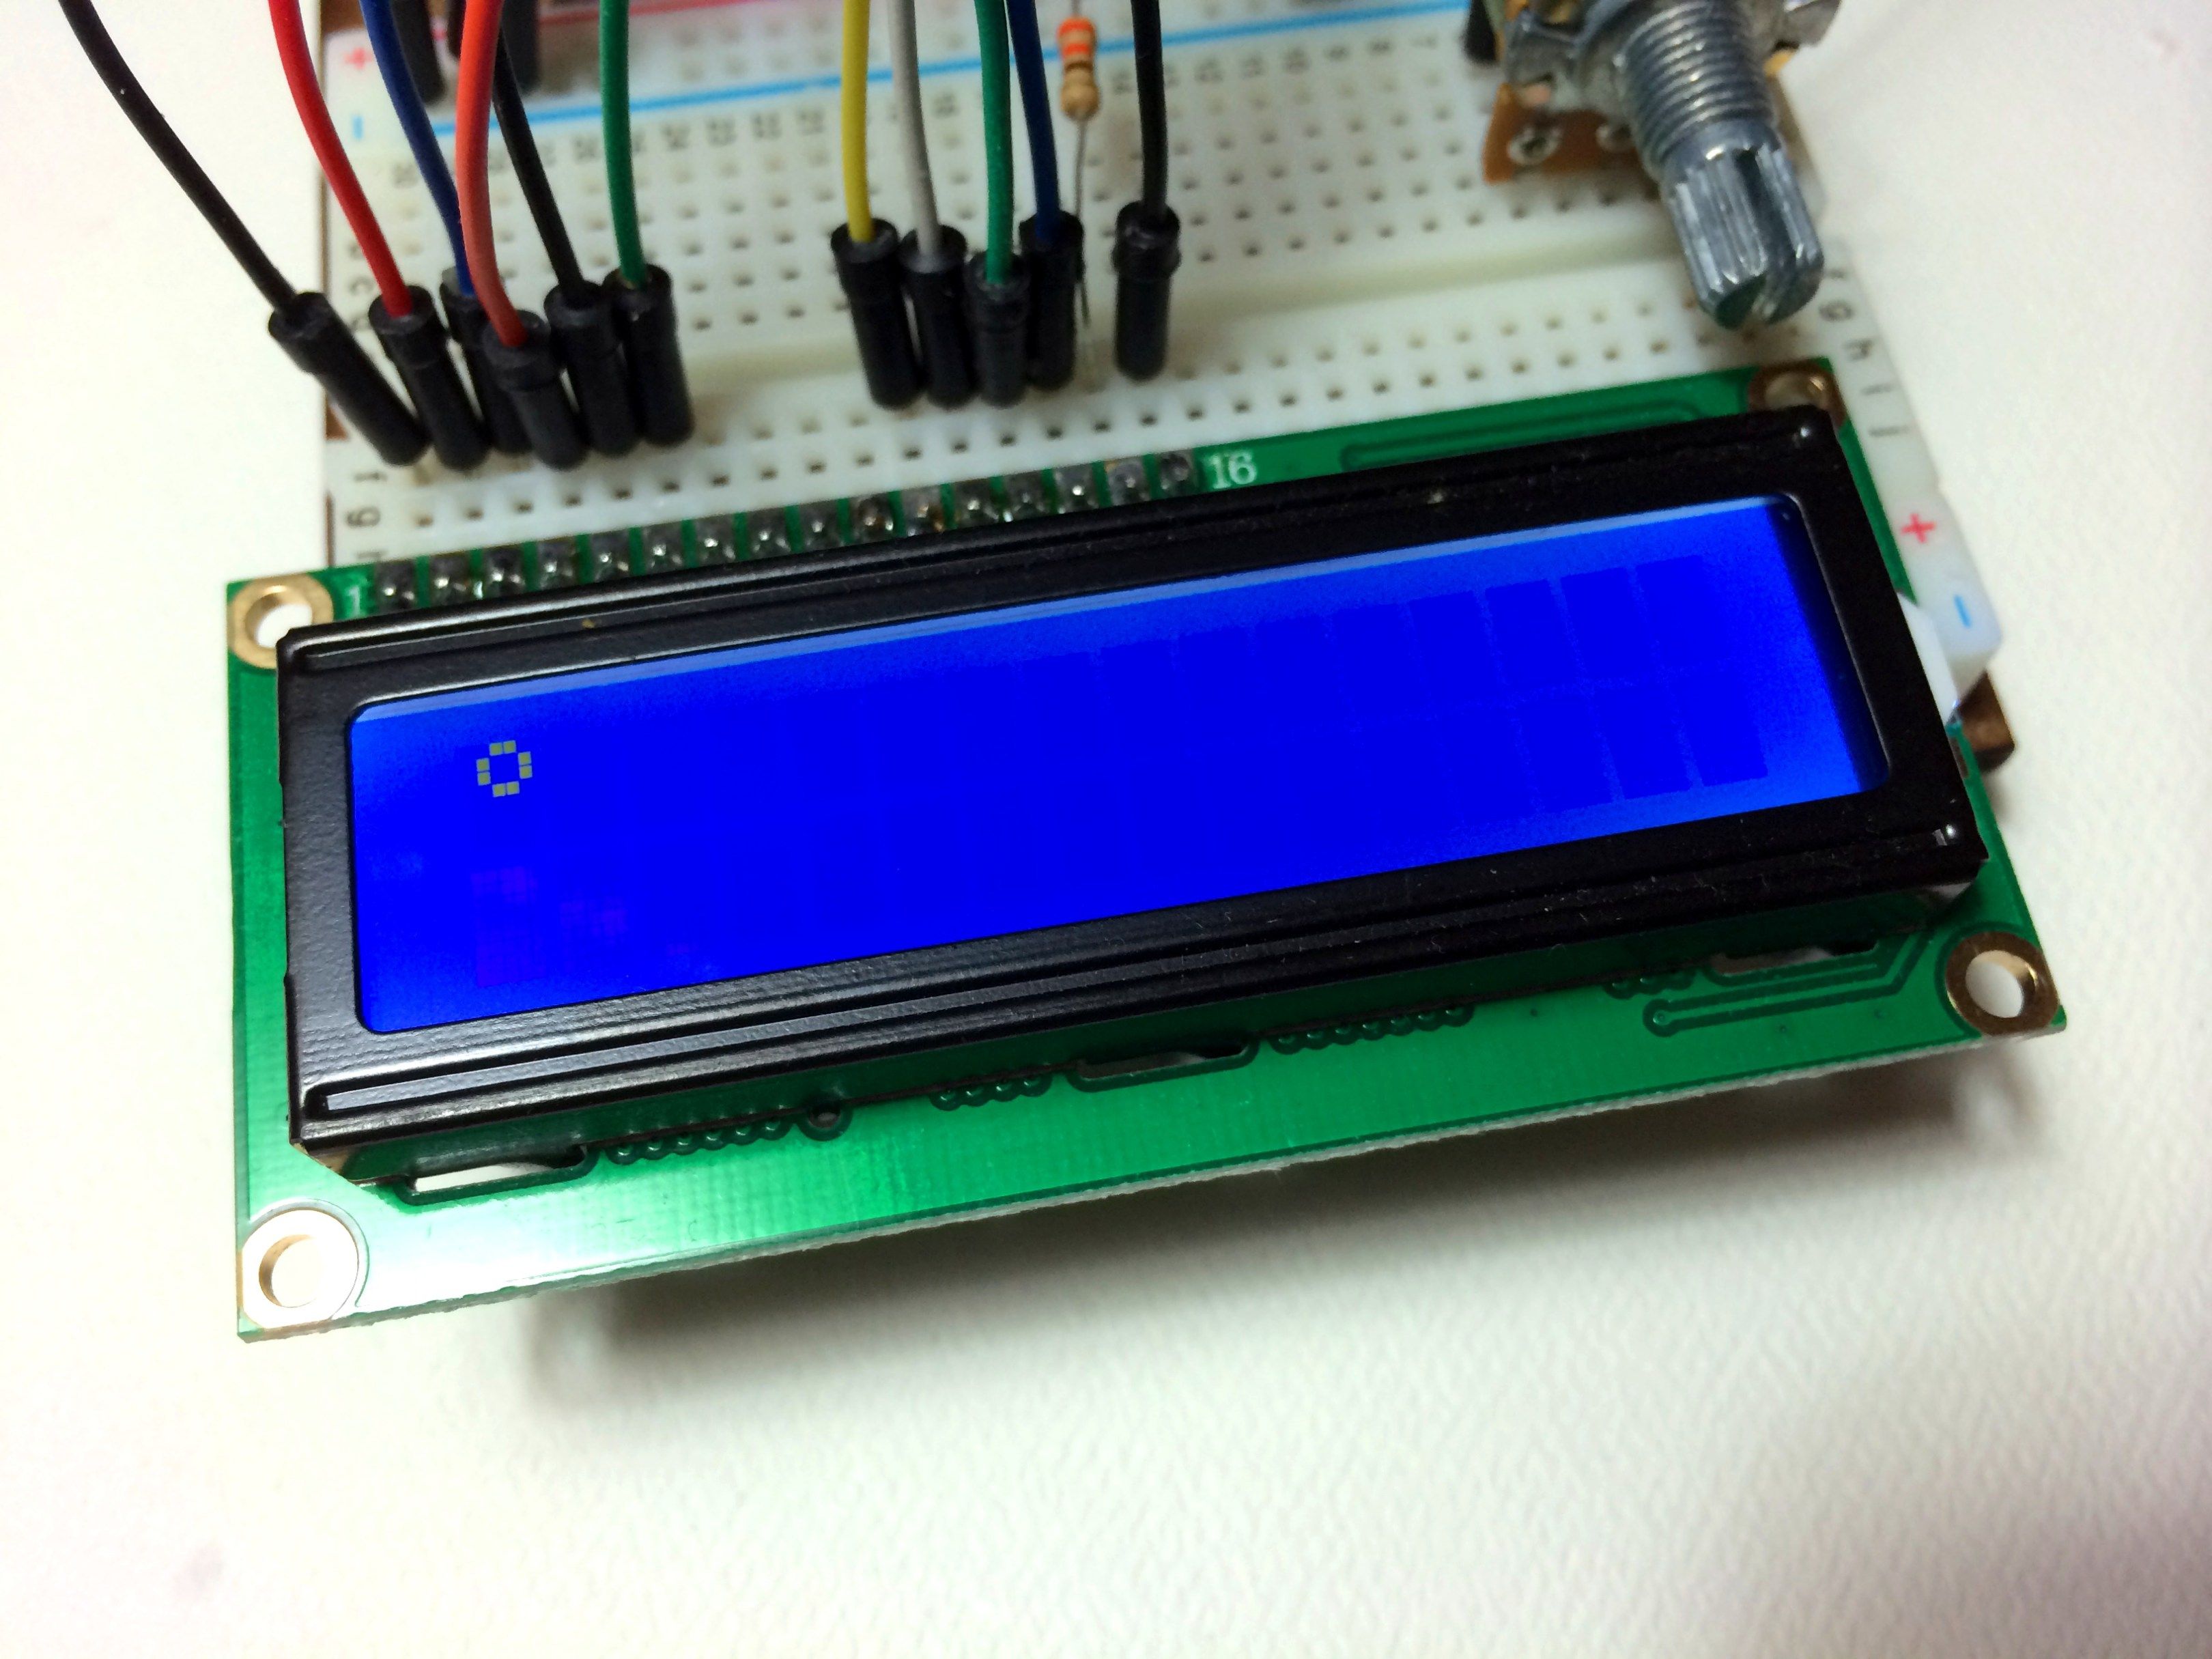 program at90s2313 with arduino lcd display